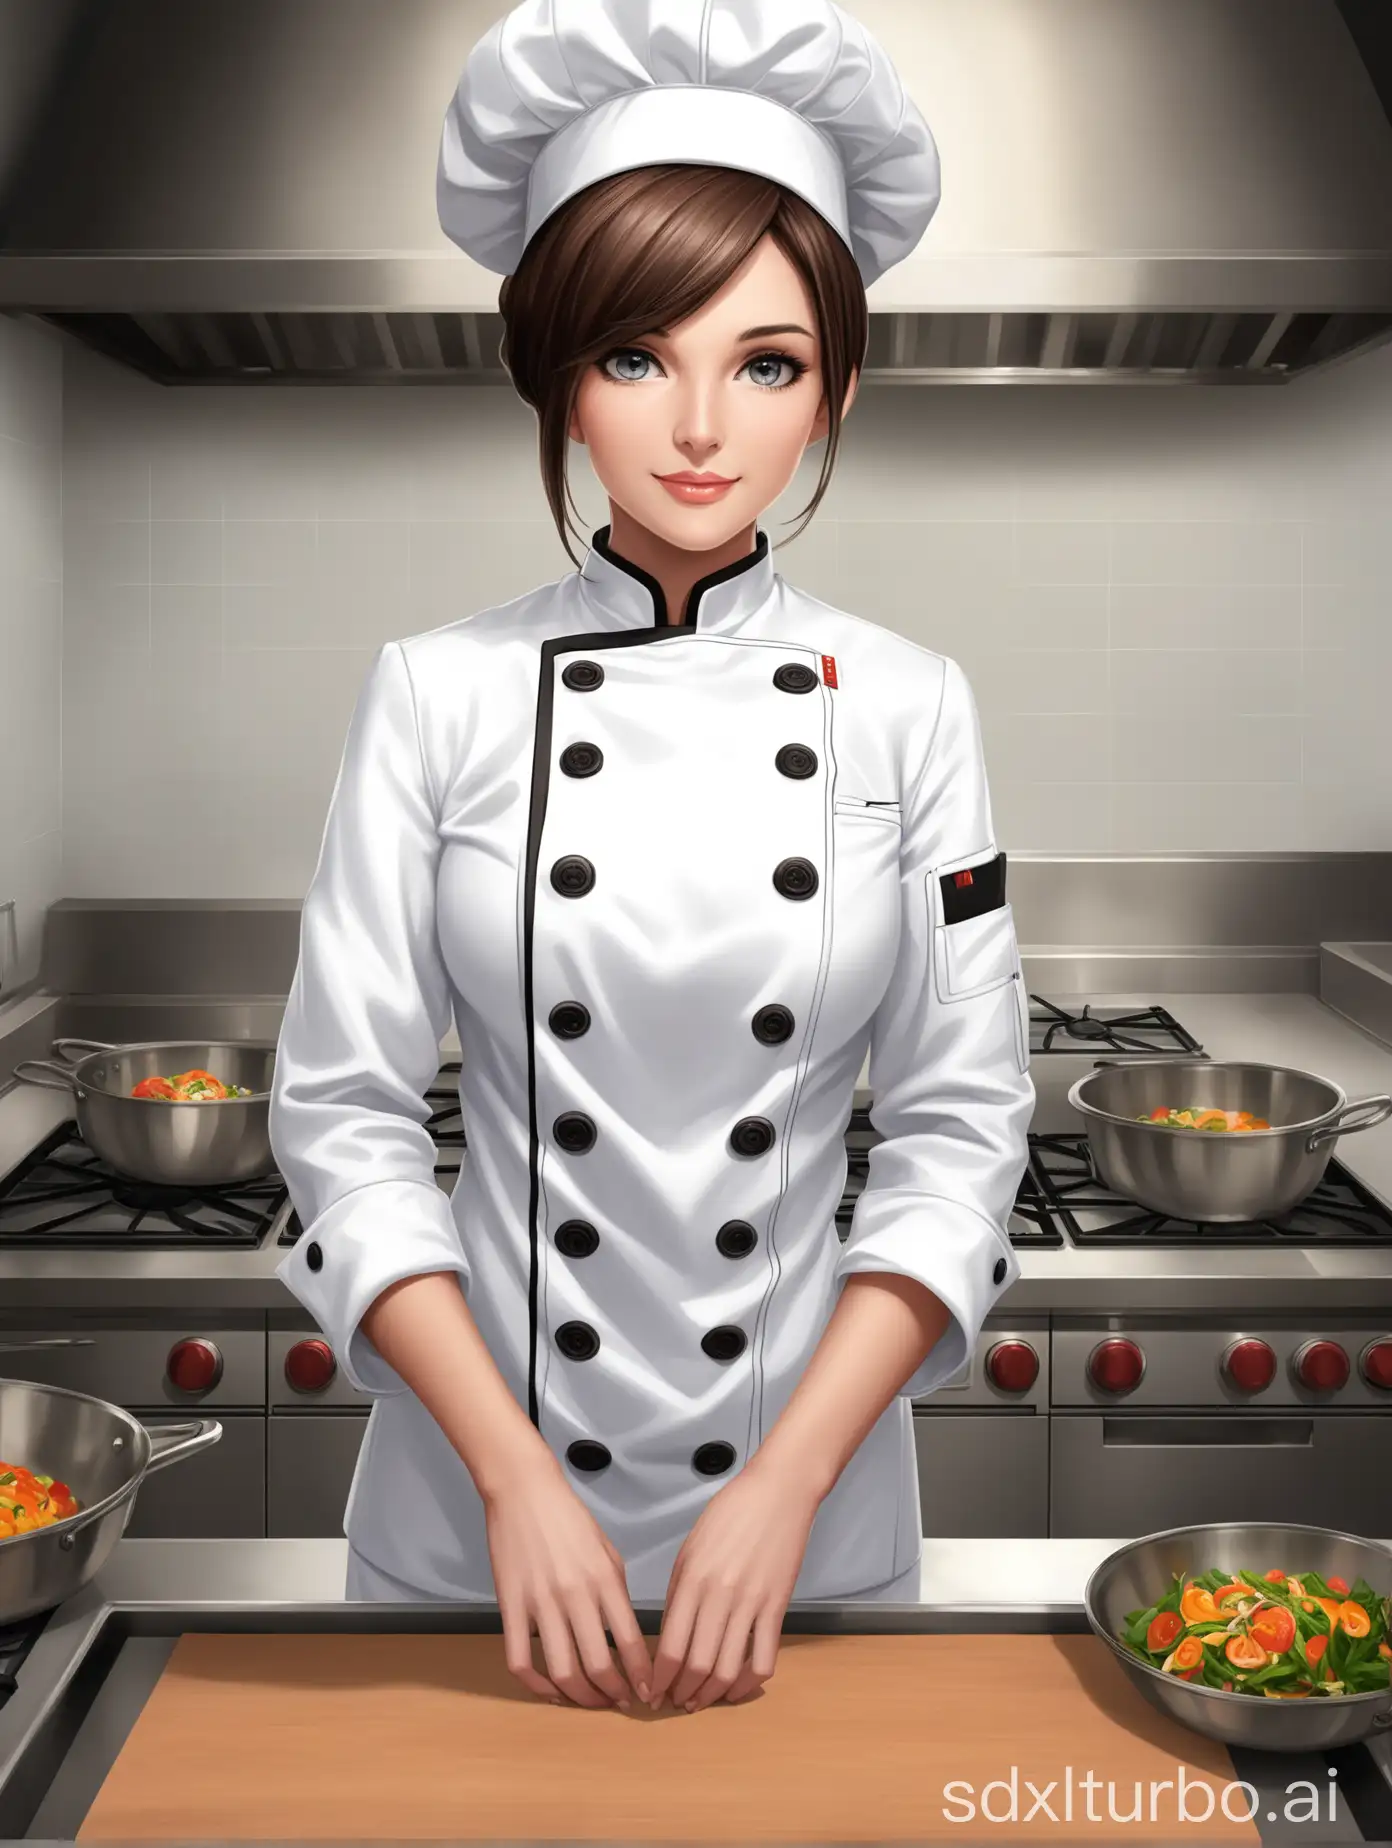 A young woman is exuding confidence and professional spirit. Her hairstyle is elegant, with a gentle smile on her lips, wearing a clean white chef's jacket, standing there composedly. The double-breasted buttons add a classic touch to her attire, symbolizing culinary expertise. With her hands gently resting on her waist, looking directly at the camera, she emits an approachable and friendly air, complementing her authority in the professional kitchen.